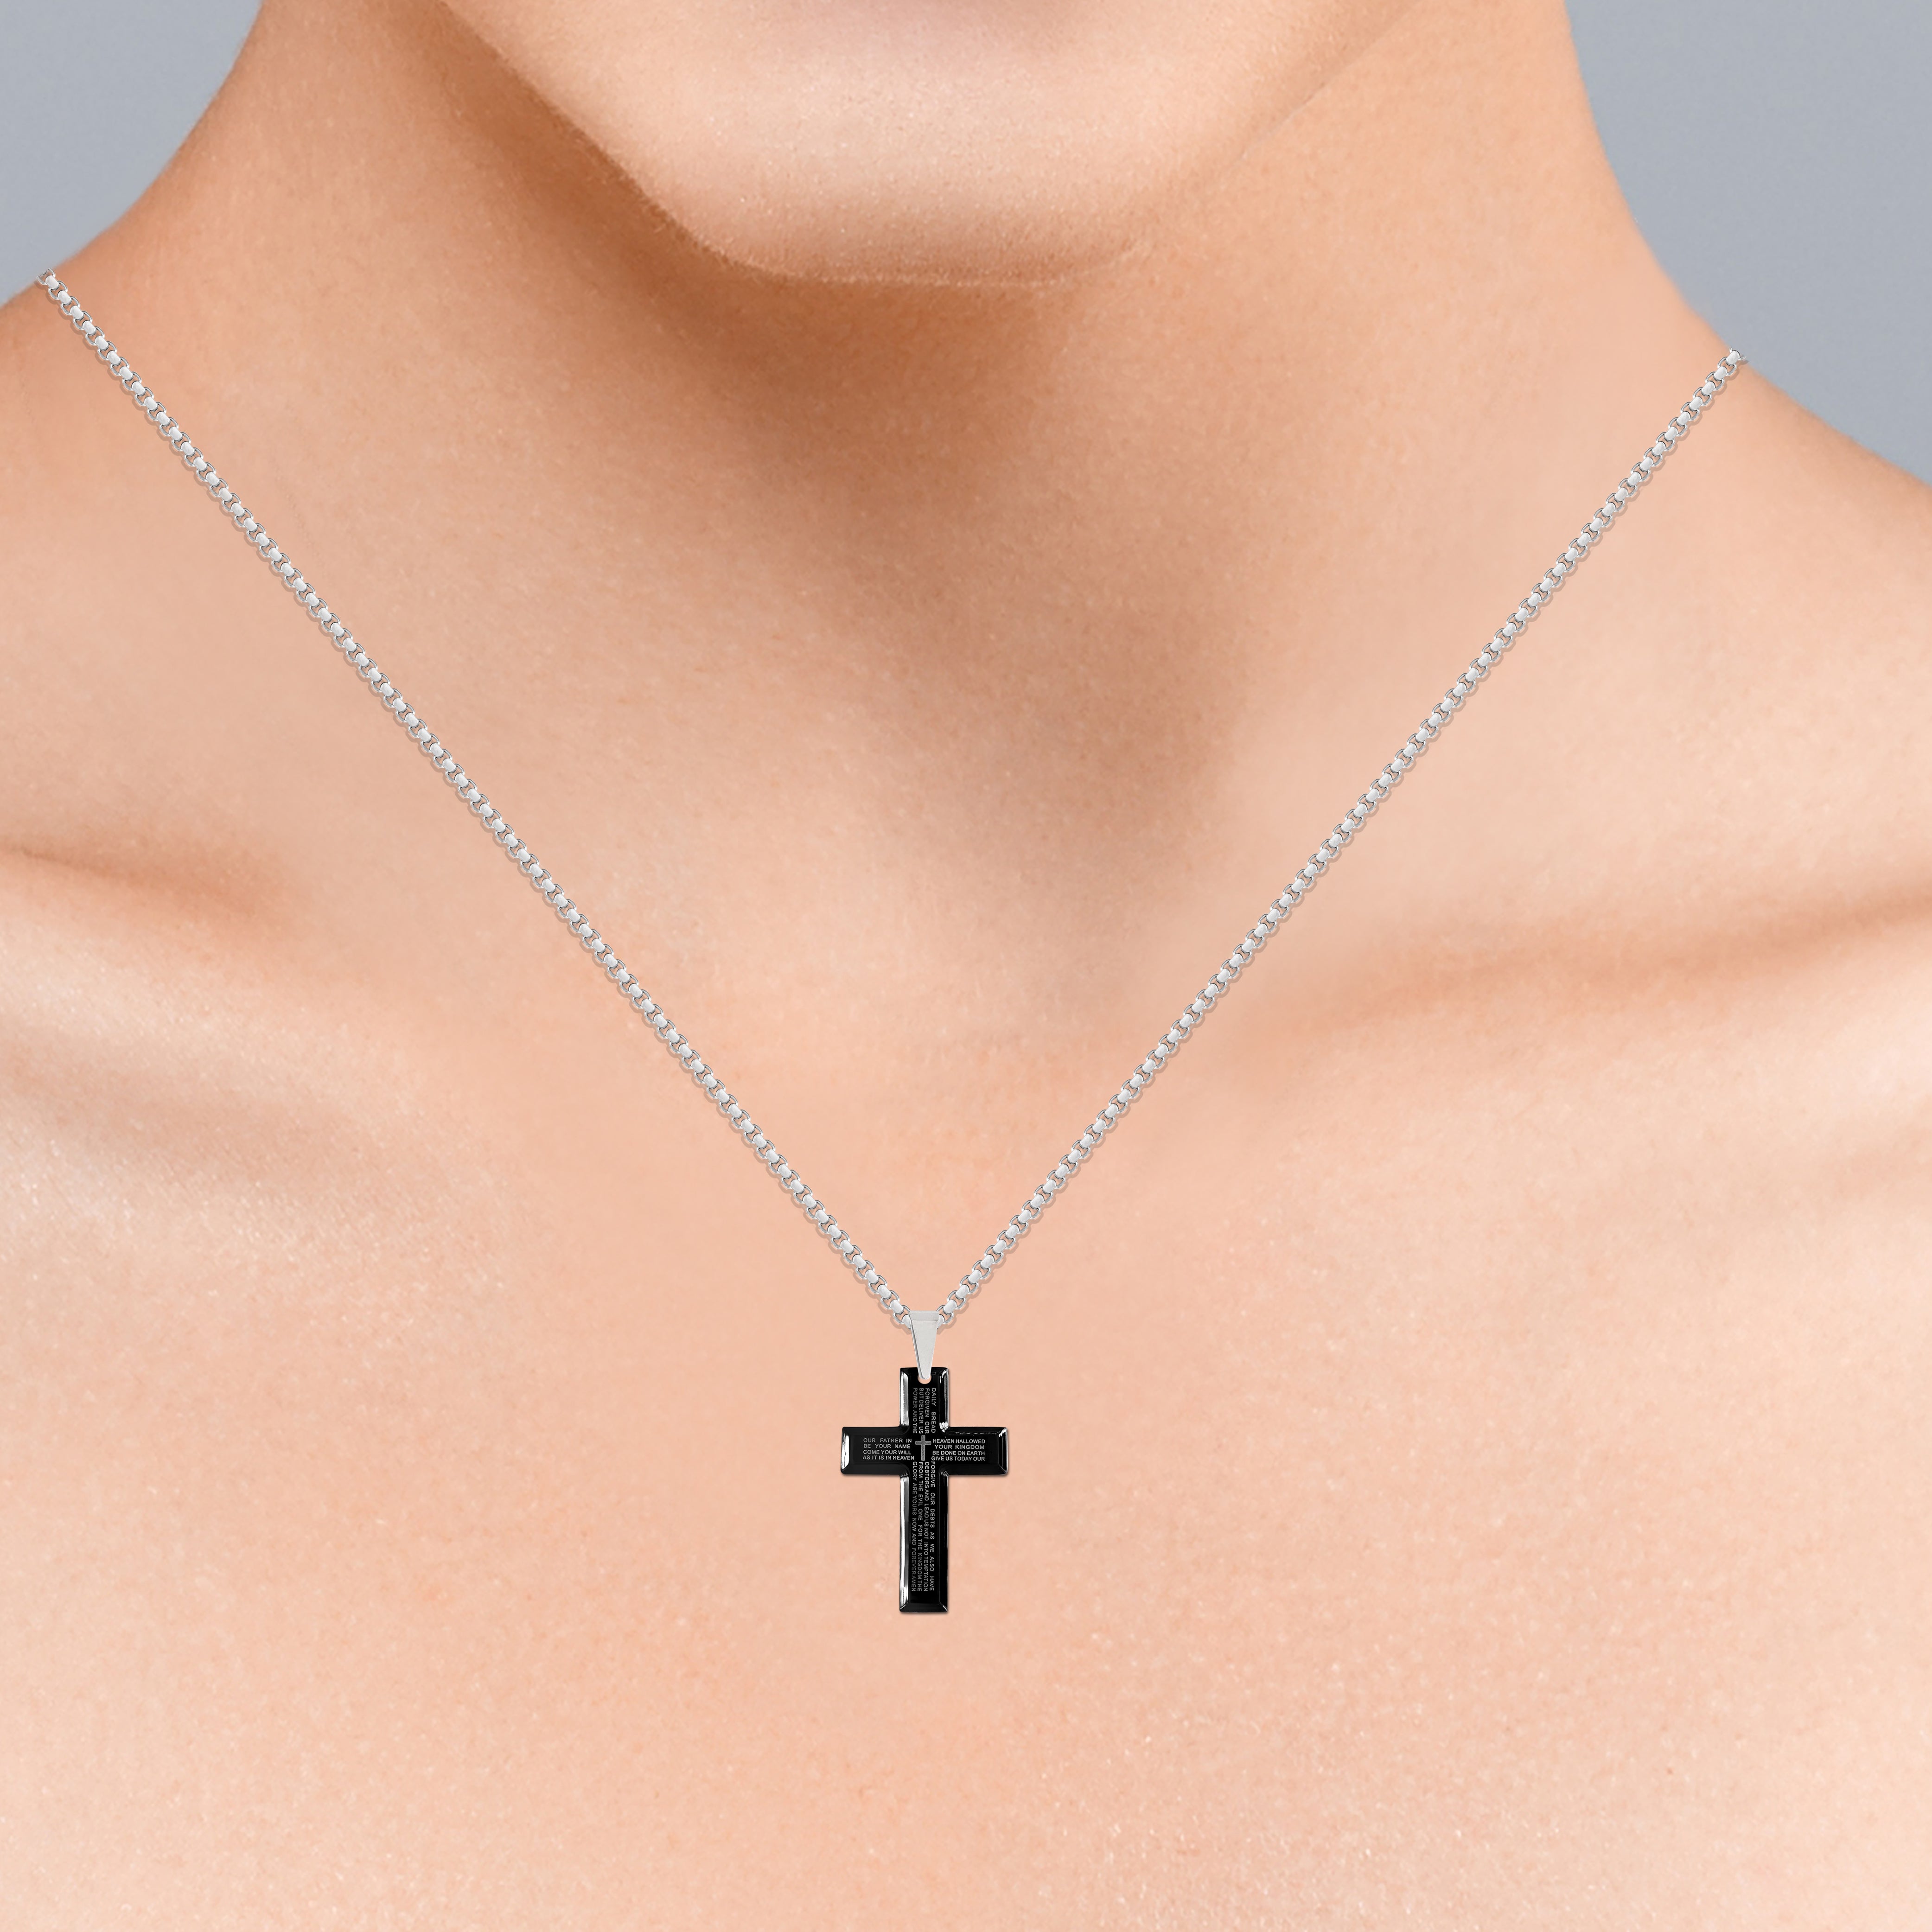 PROSTEEL Dog Tag Cross Necklace for Men Boys Stainless Steel Gold Pendant  Chain Bible Verse Inspirational Religious Christian Jewelry Gifts, Military  Tag with Words - Walmart.com